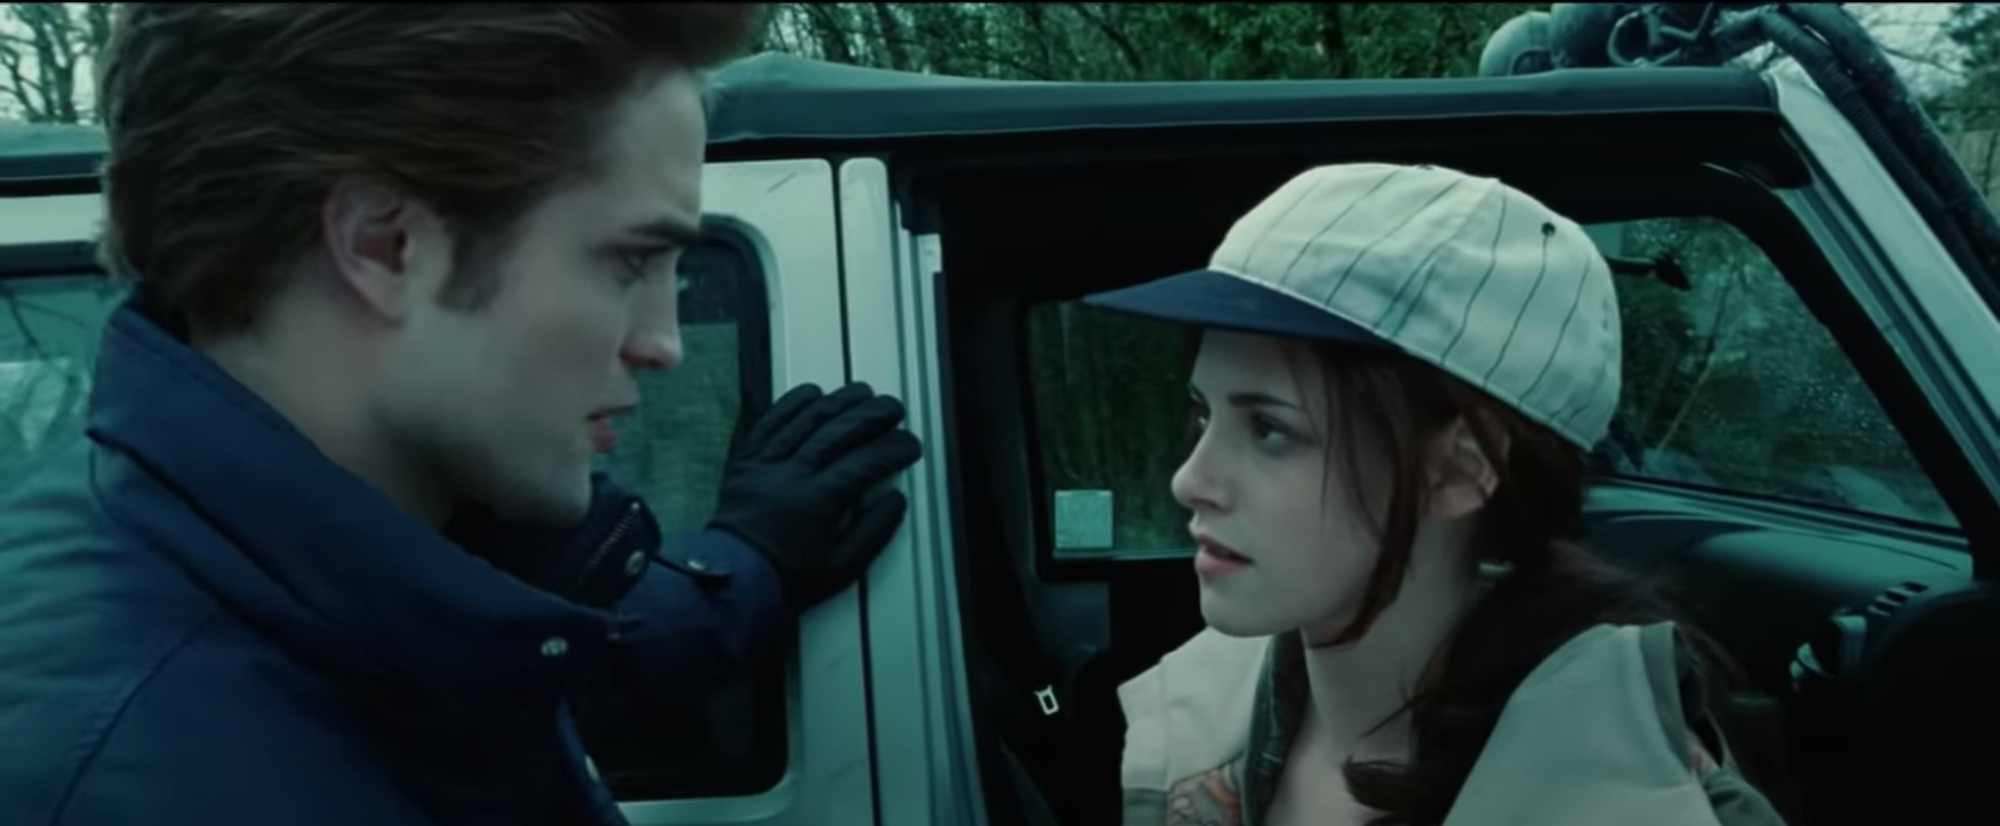 This 8 Skill in the 'Twilight' Baseball Scene Was Real